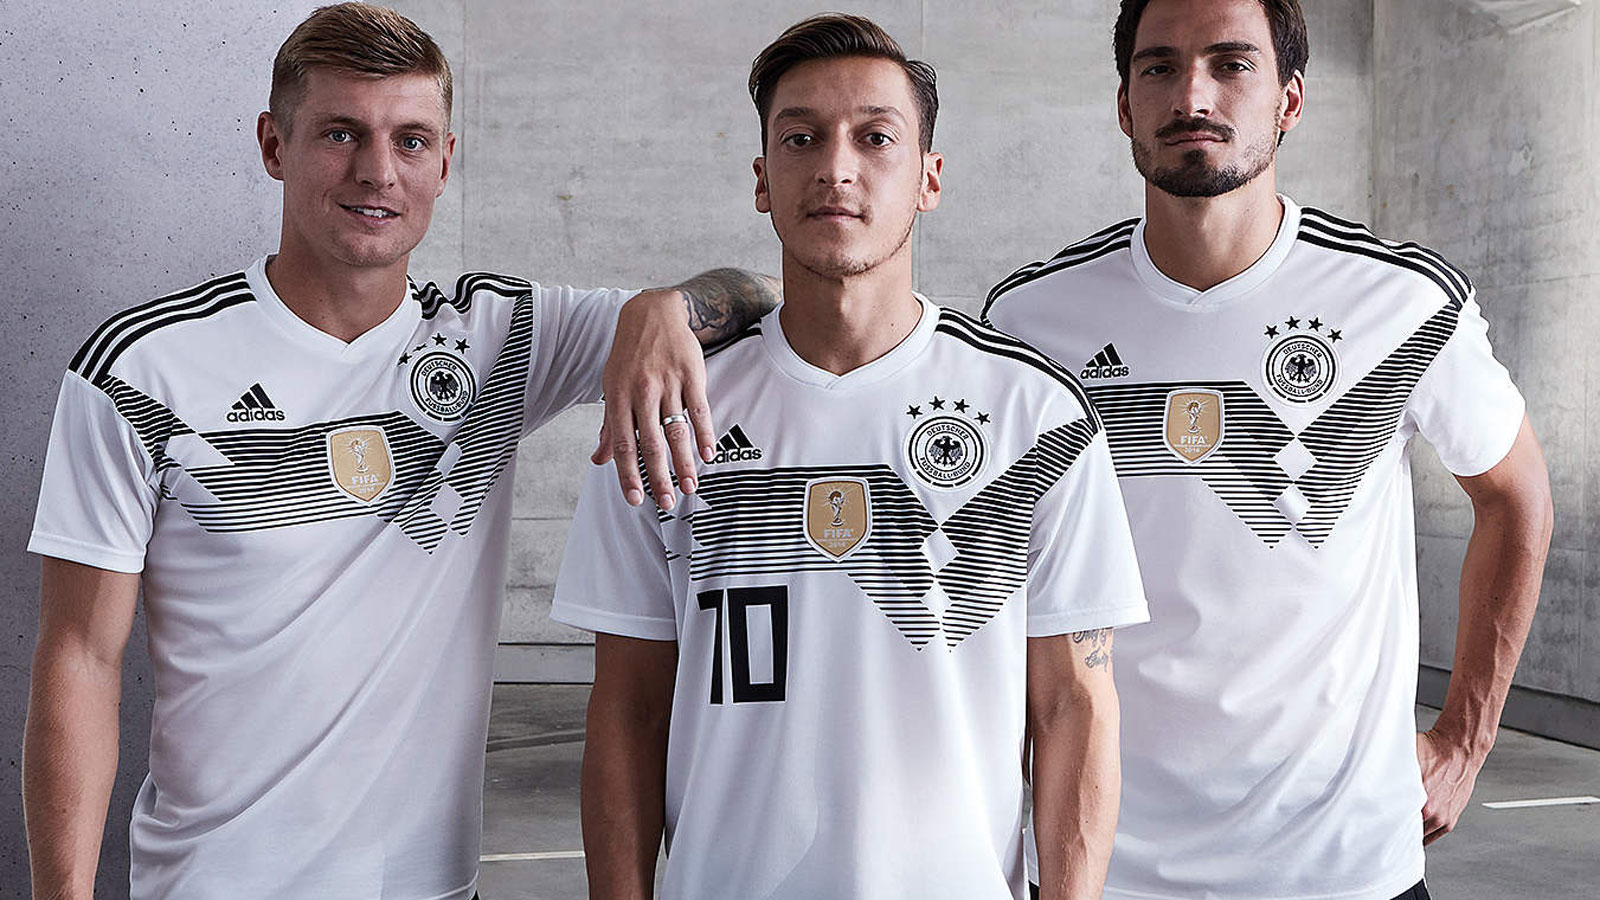 Germany National Team Wallpaper HD With Resolution 1600X900 pixel. You can make this wallpaper for your Mac or Windows Desktop Background, iPhone, Android or Tablet and another Smartphone device for free